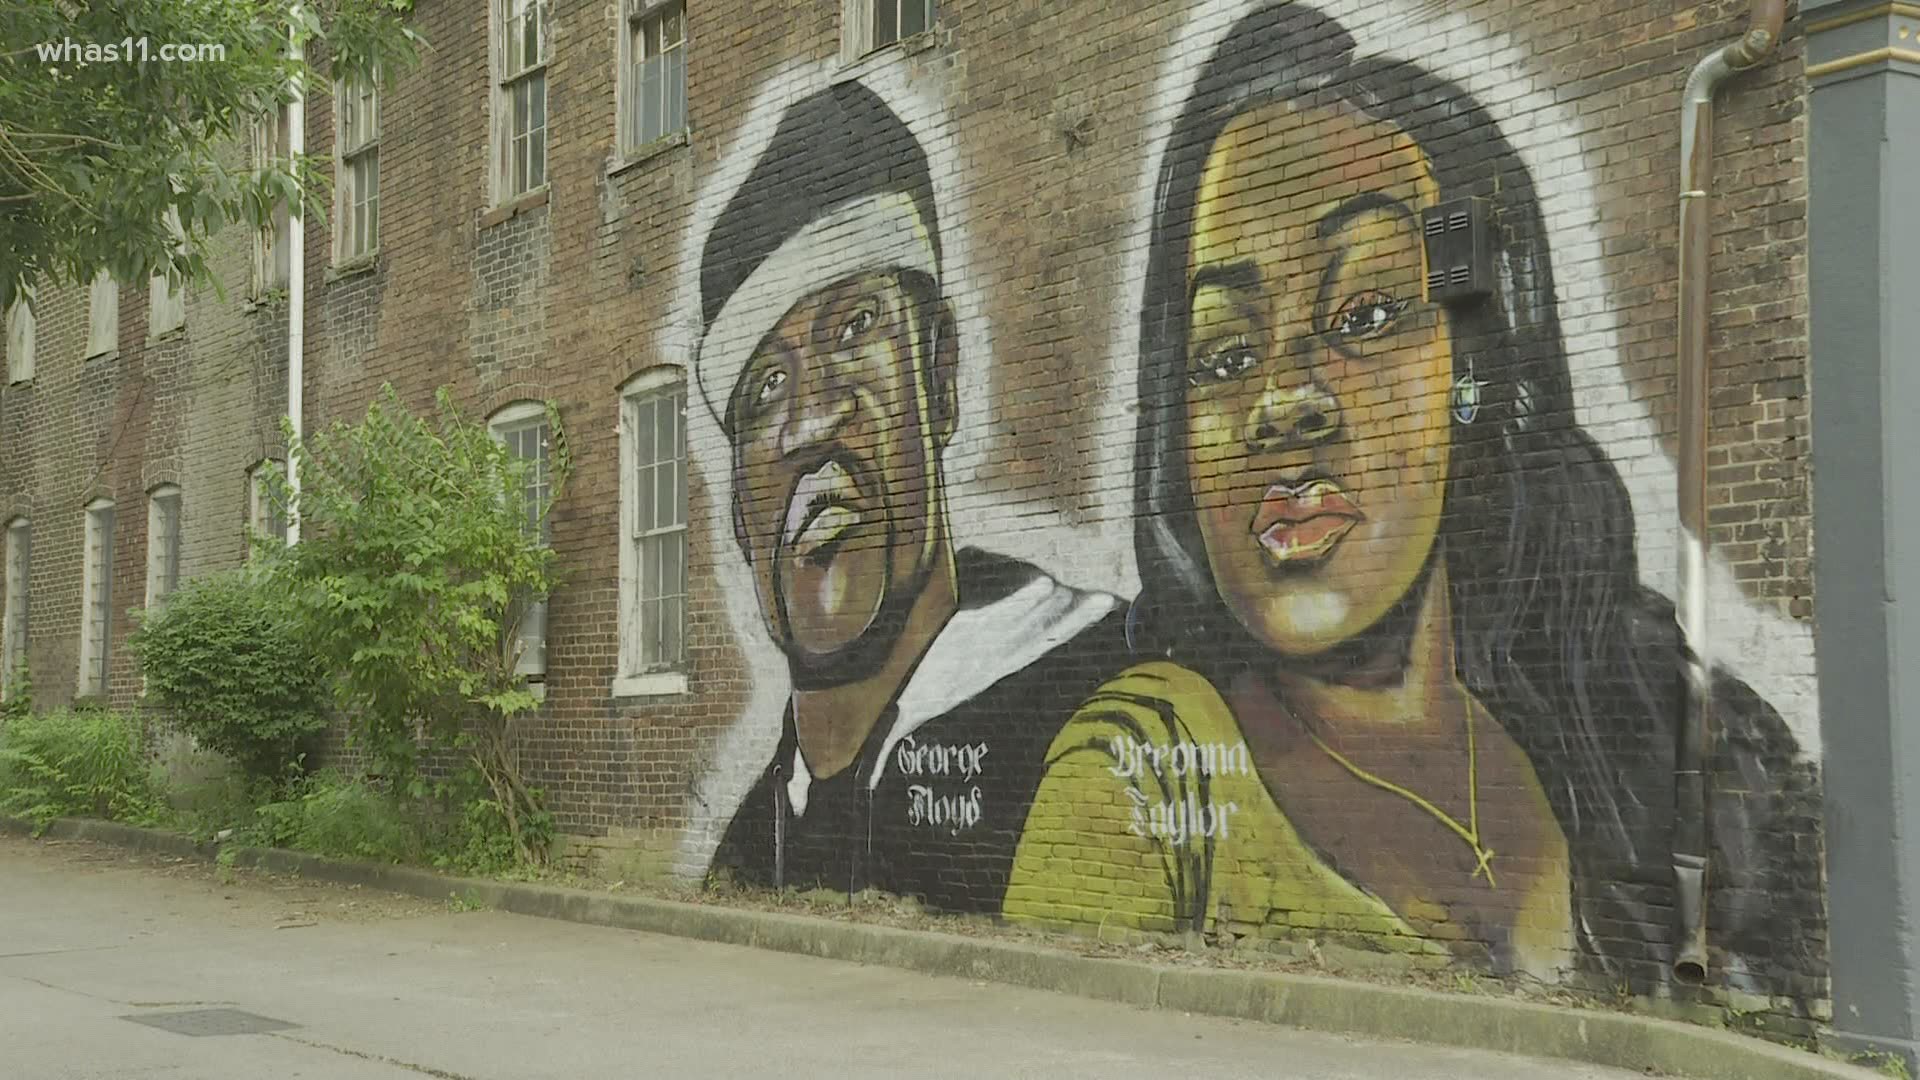 A large, impressive mural of Breonna Taylor and George Floyd now graces the wall of an art studio in Louisville’s Phoenix Hill neighborhood.